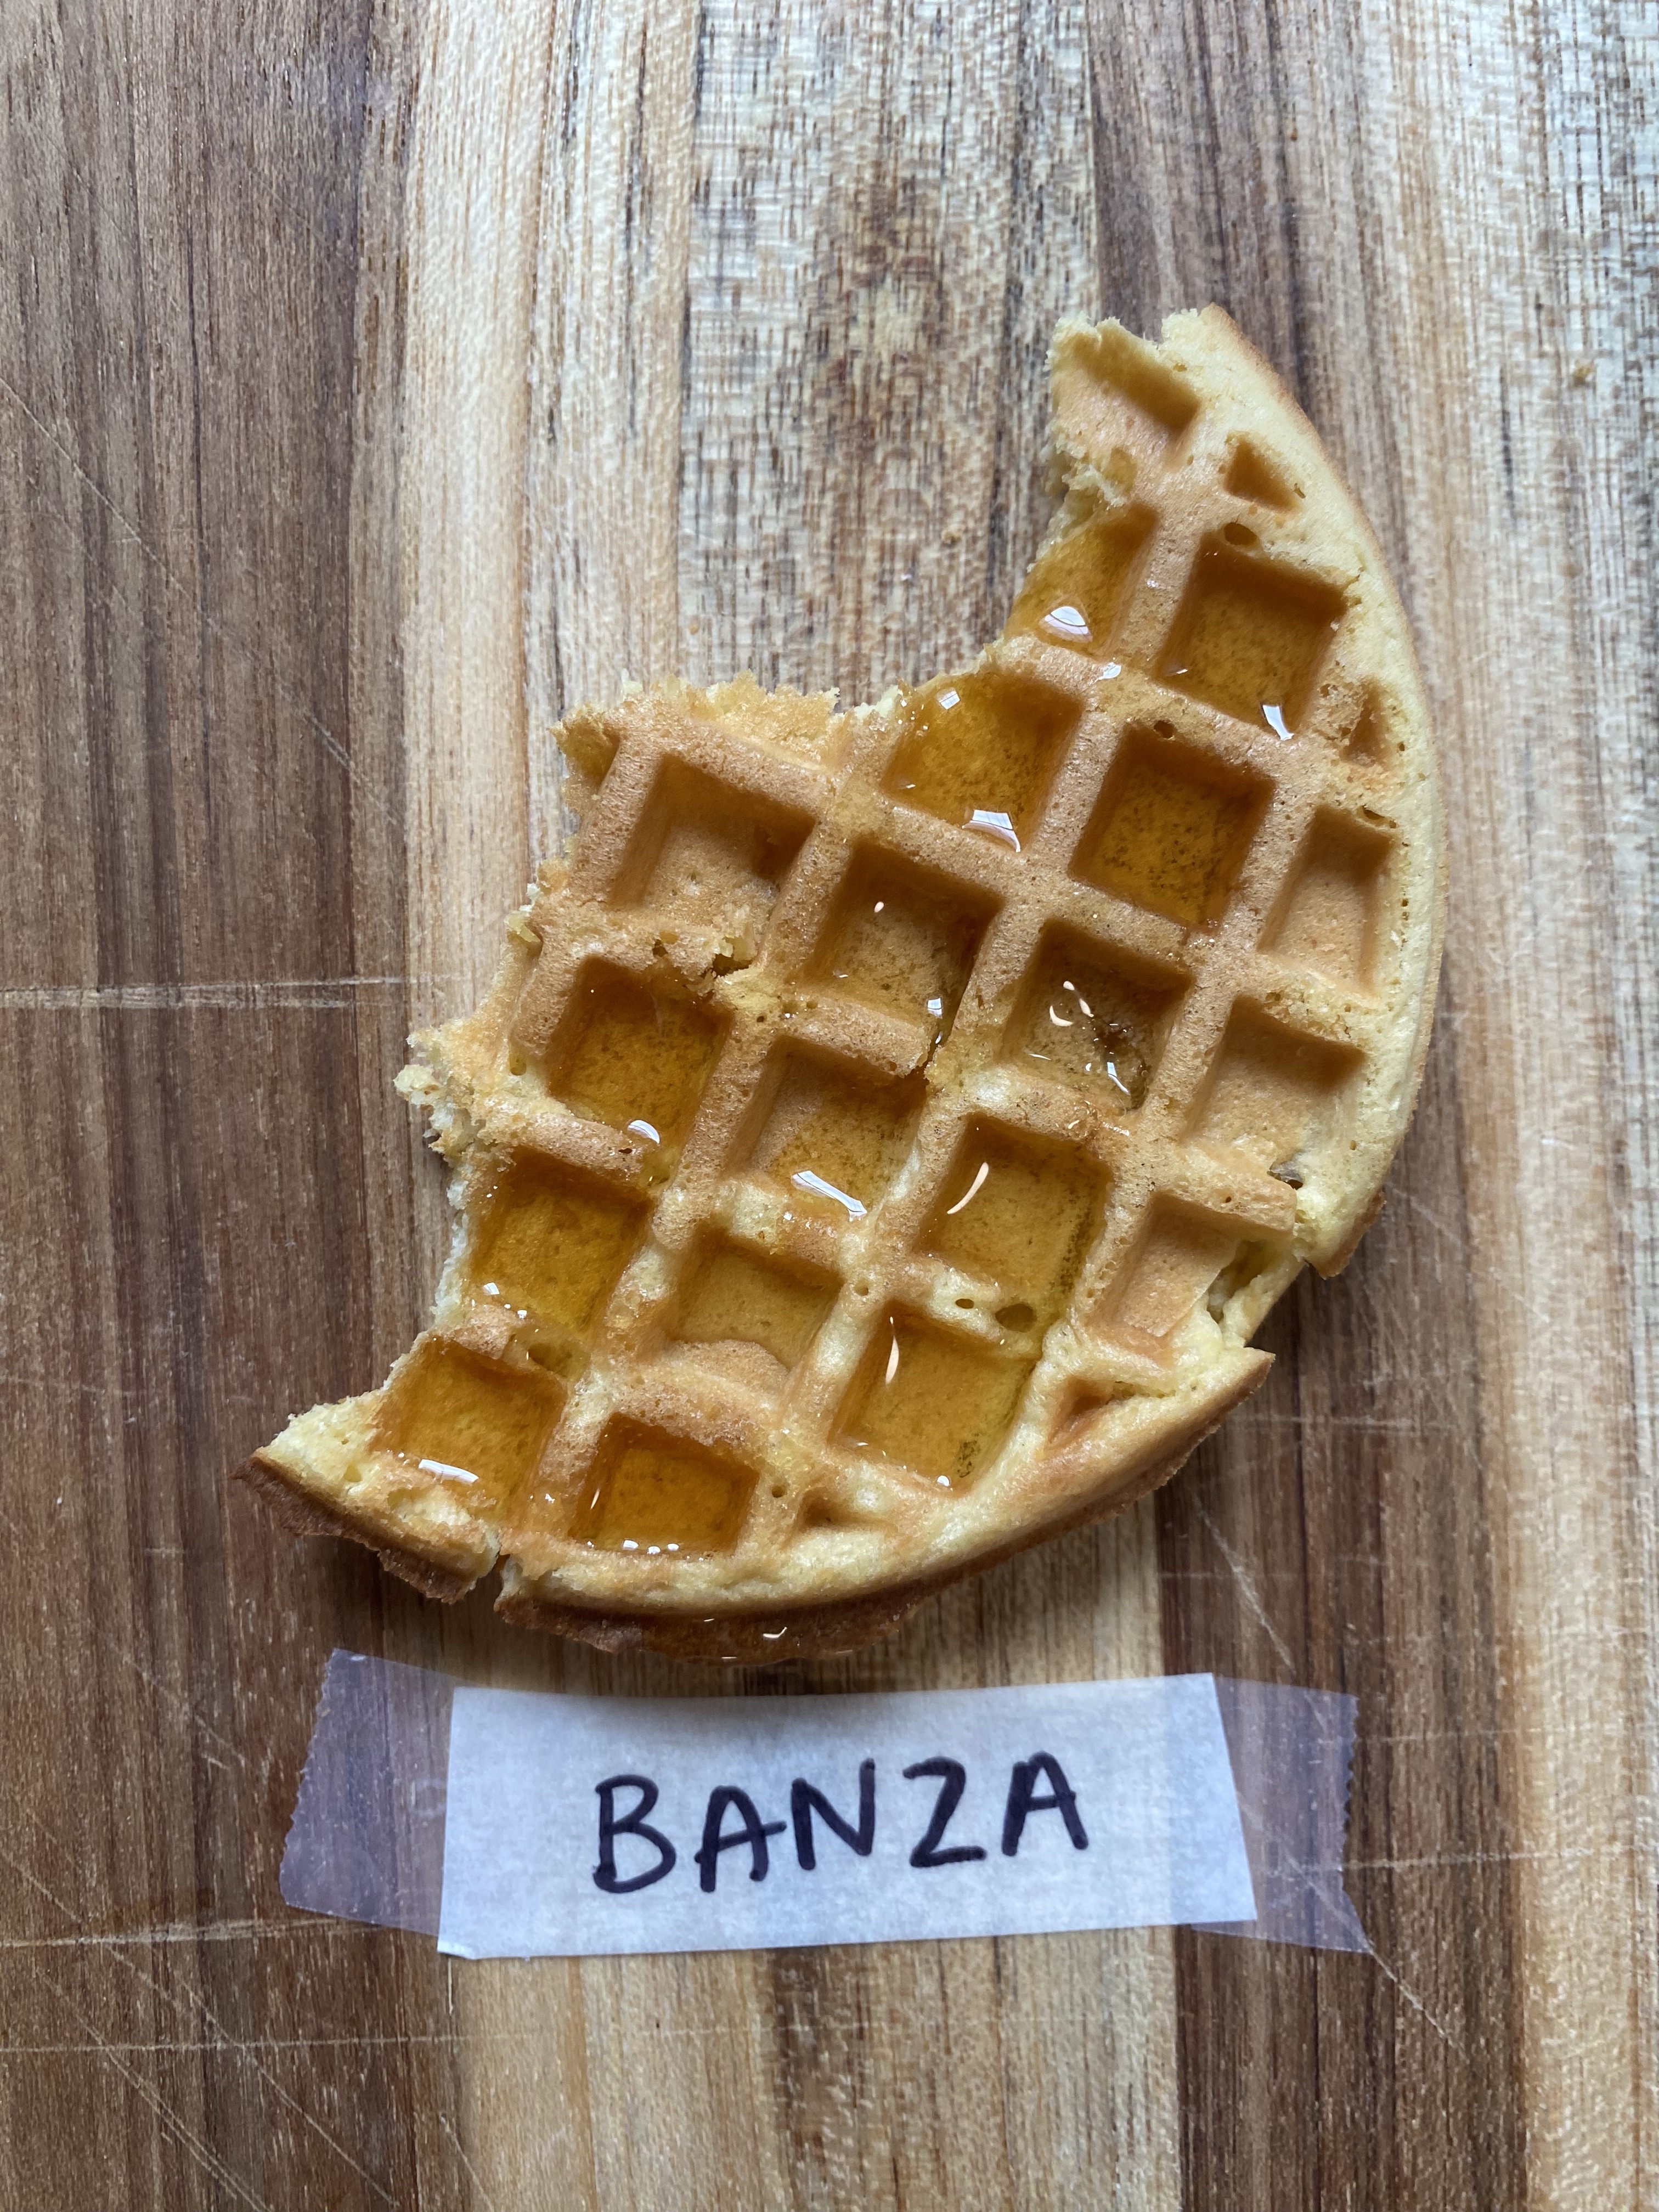 a banza waffle with maple syrup